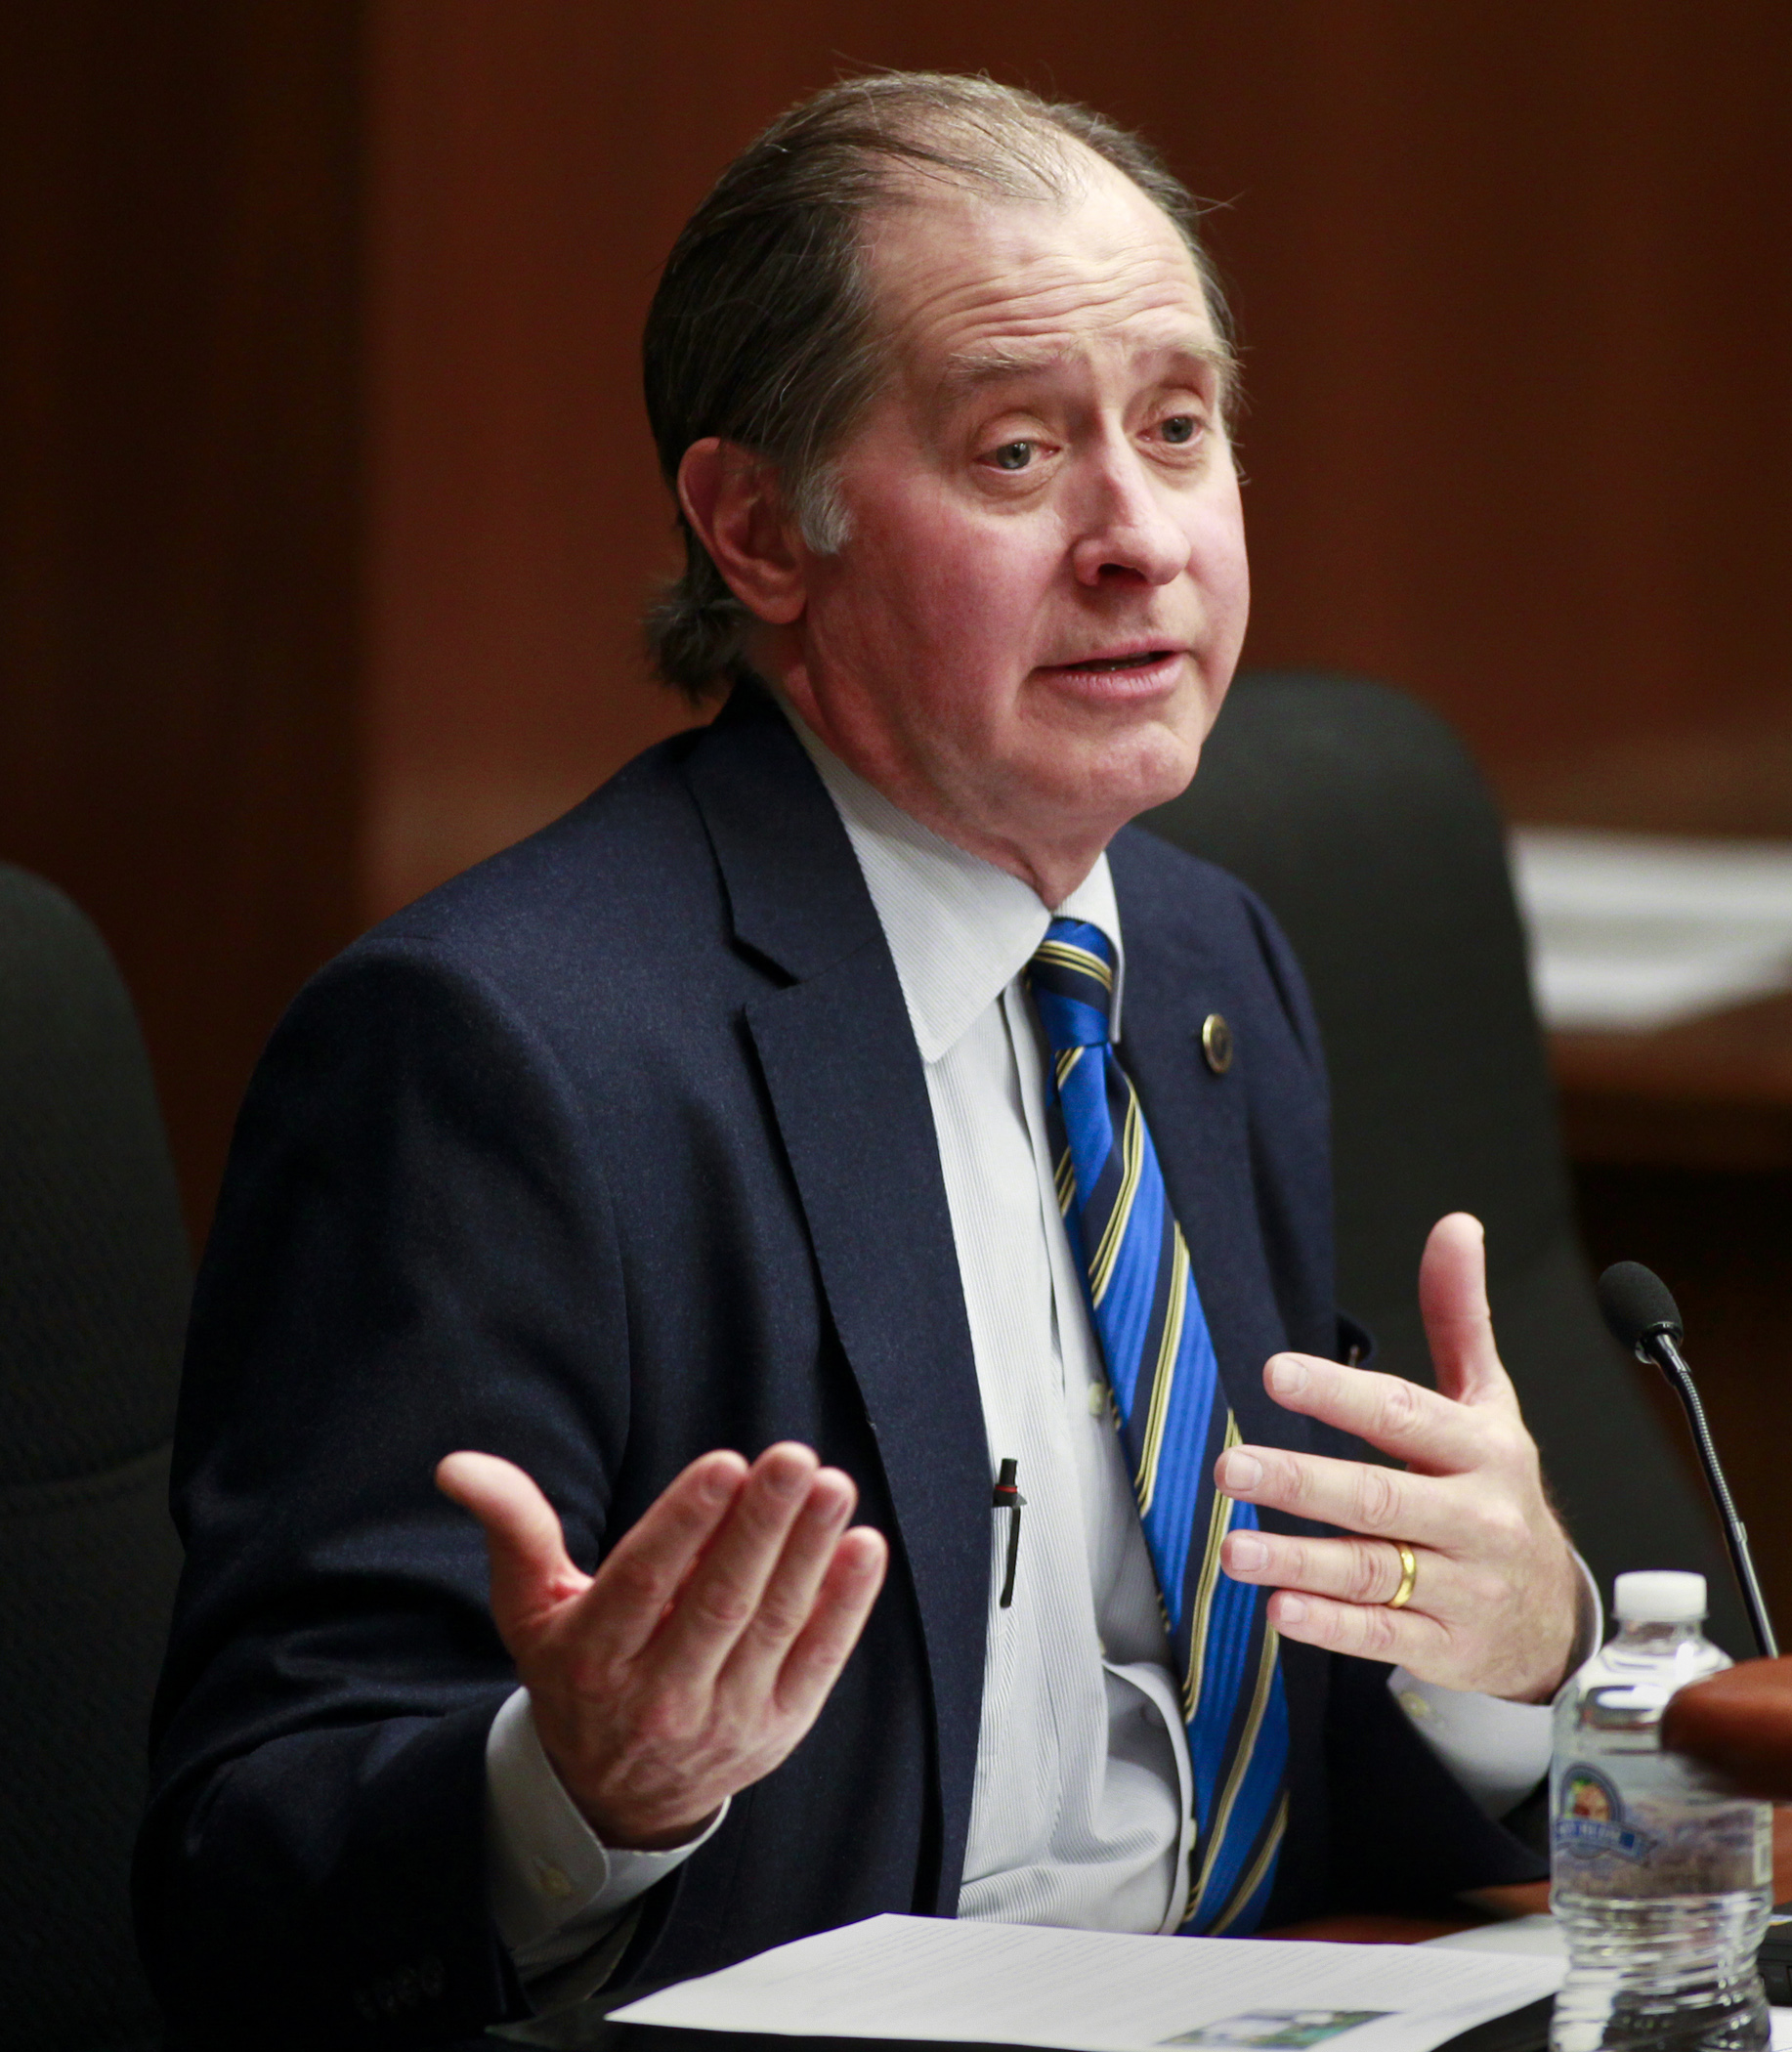 Transportation Commissioner Charles Zelle addresses the House Transportation Policy and Finance Committee Jan. 26. Photo by Paul Battaglia